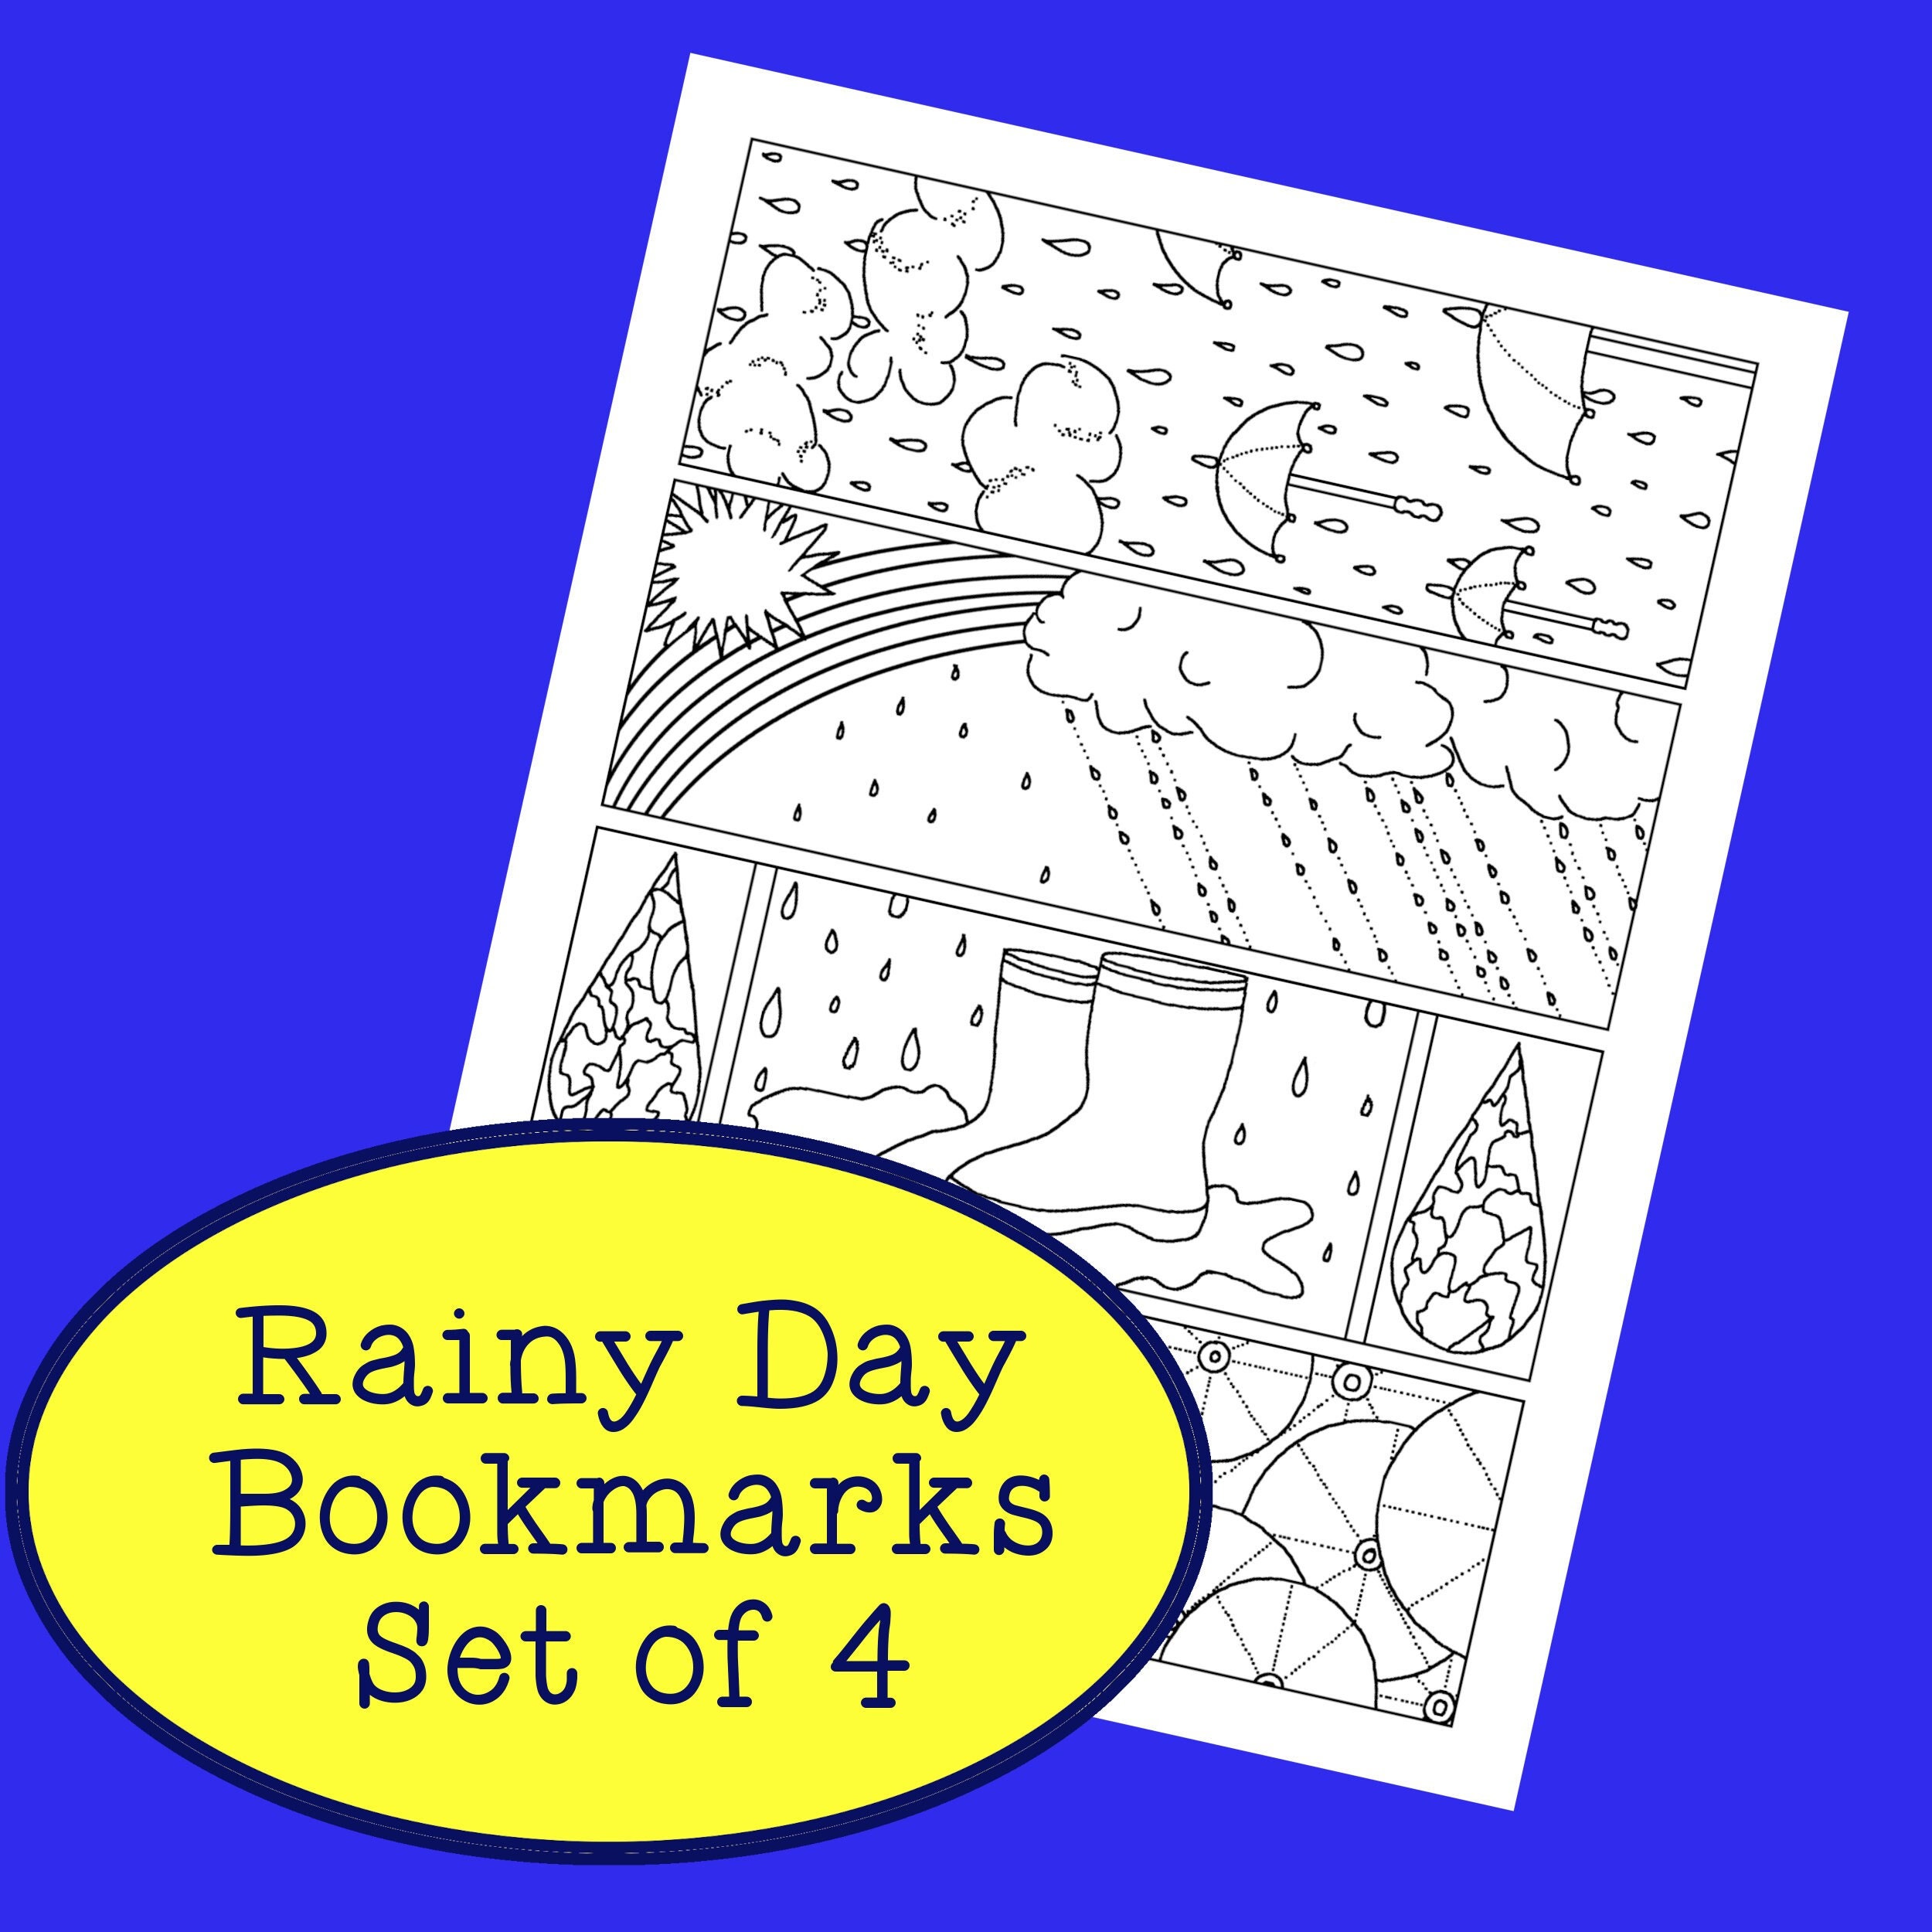 Rainy day bookmarks pdf printable coloring page rain clouds umbrellas april shower adult coloring